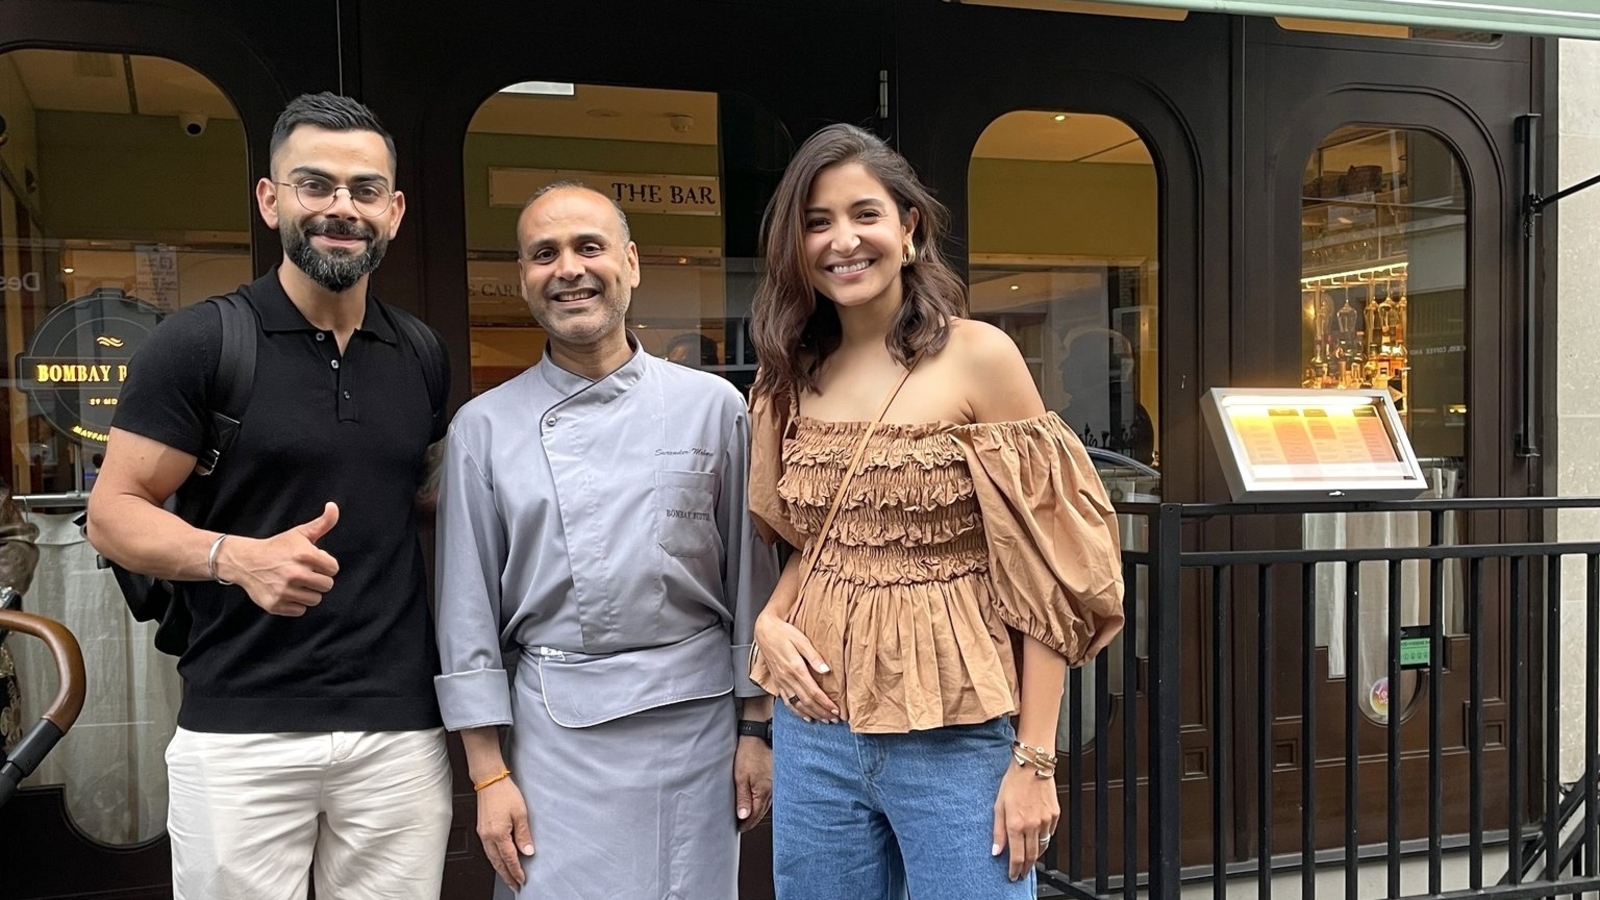 Anushka Sharma, Virat Kohli are all smiles as they pose with an Indian restaurant’s chef in London. See pic